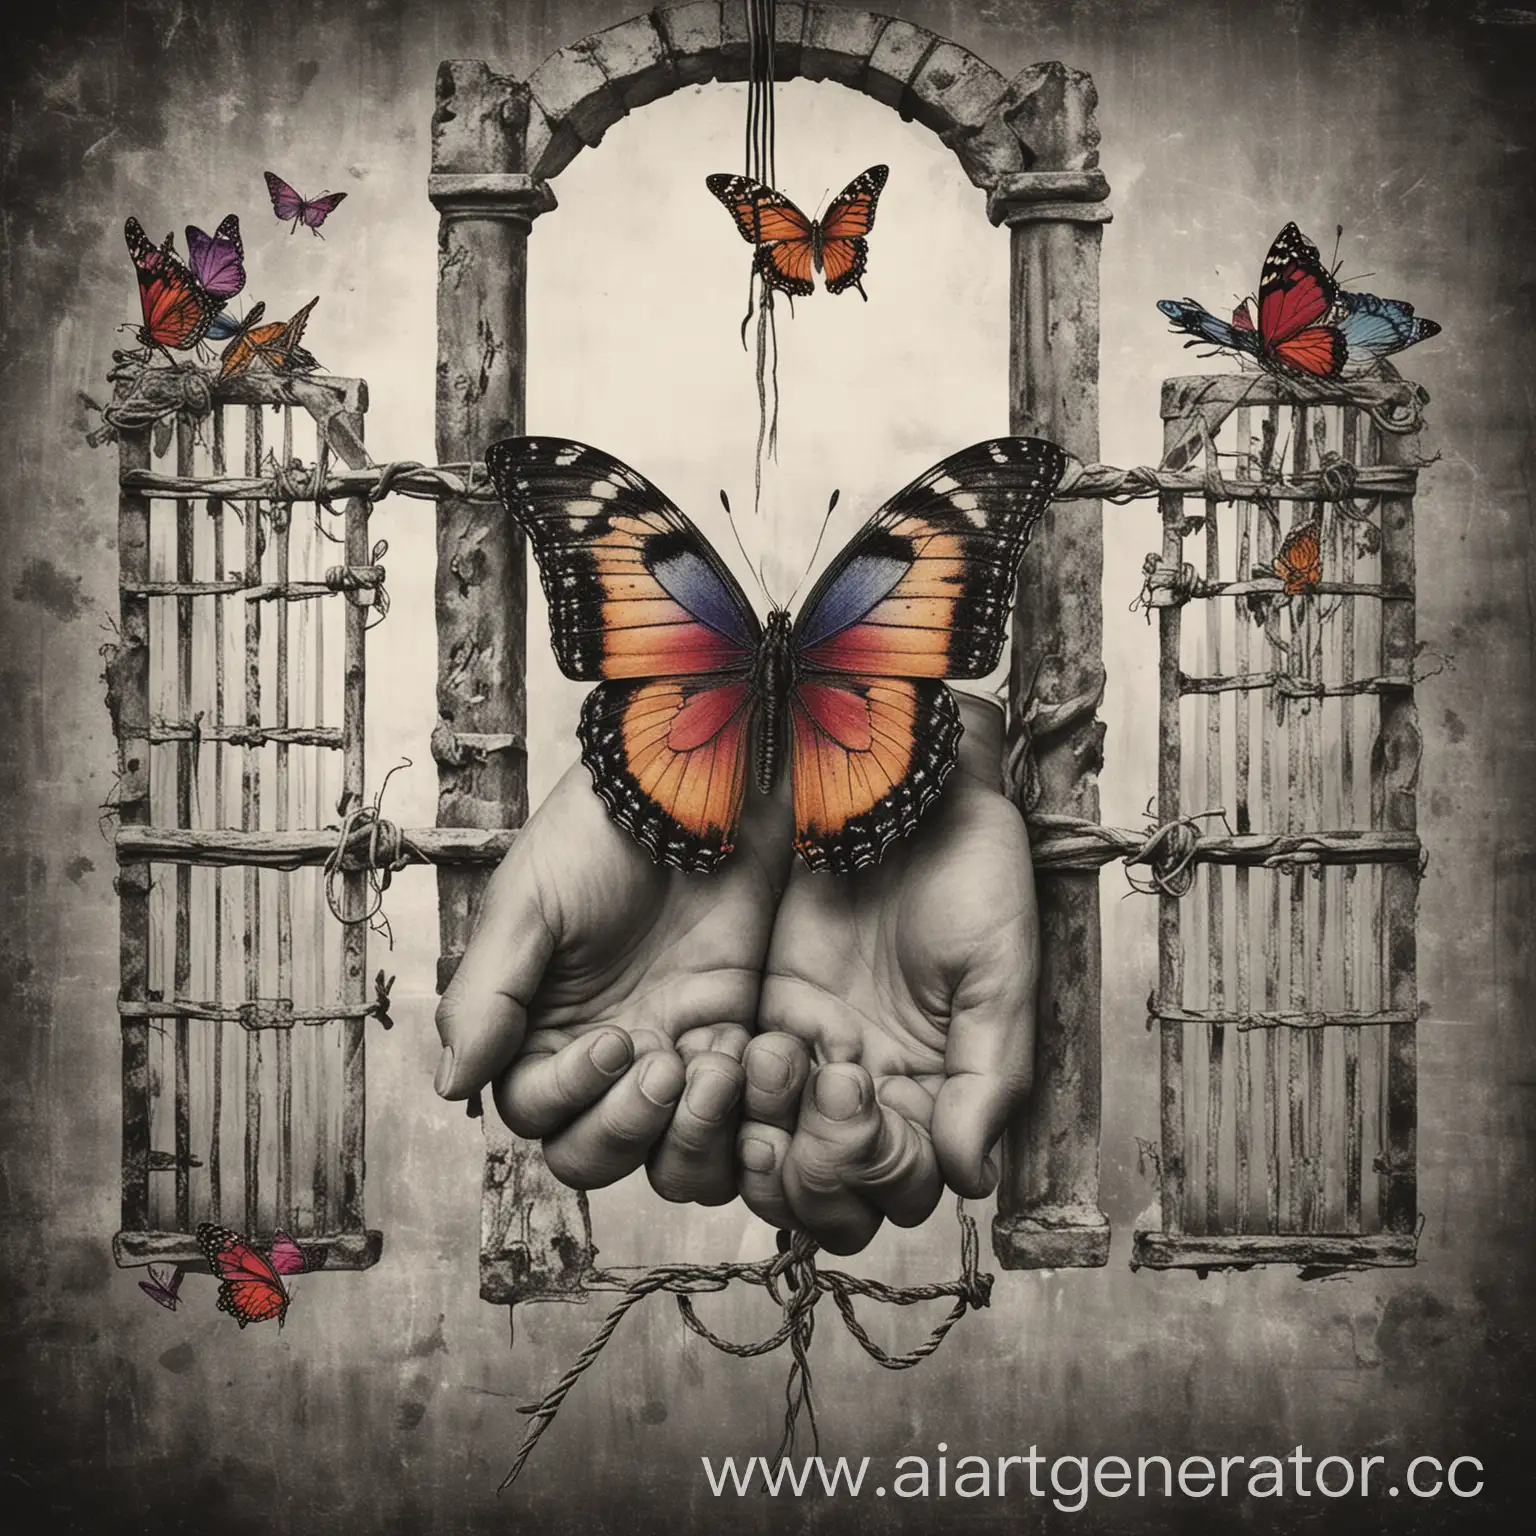 Prisoners-Liberation-Colorful-Butterfly-Breaking-Free-in-18th-Century-Prison